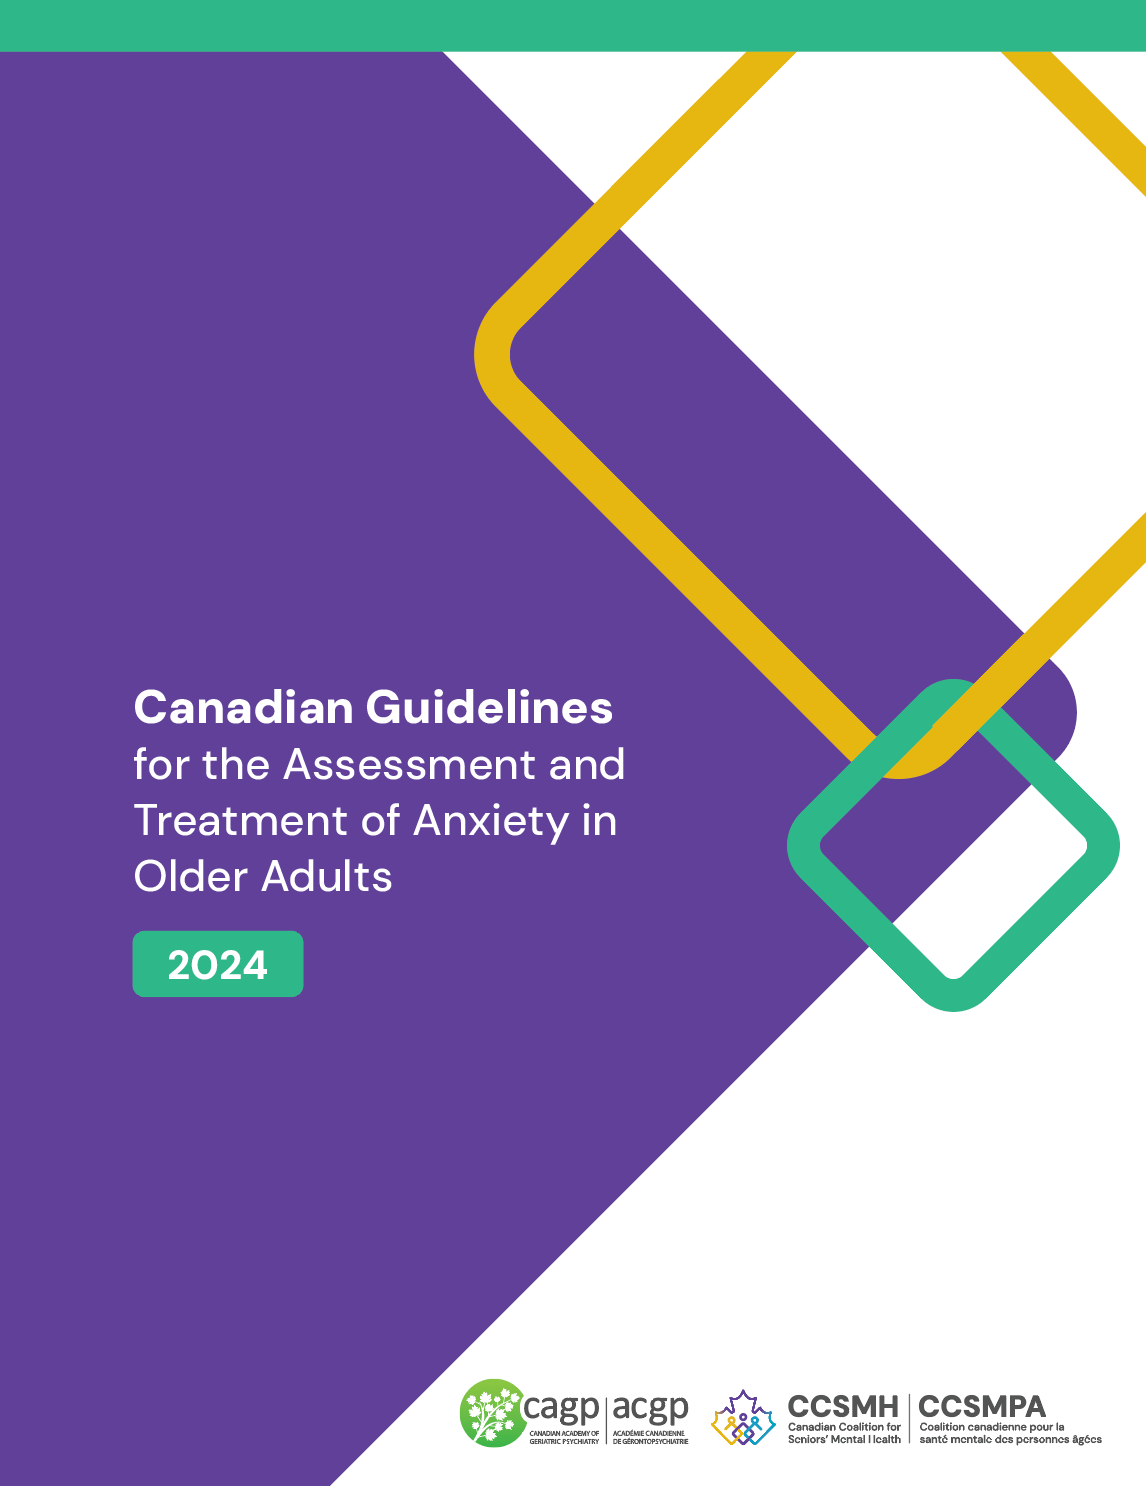 Cover of the CCSMH Anxiety Clinical Guidelines